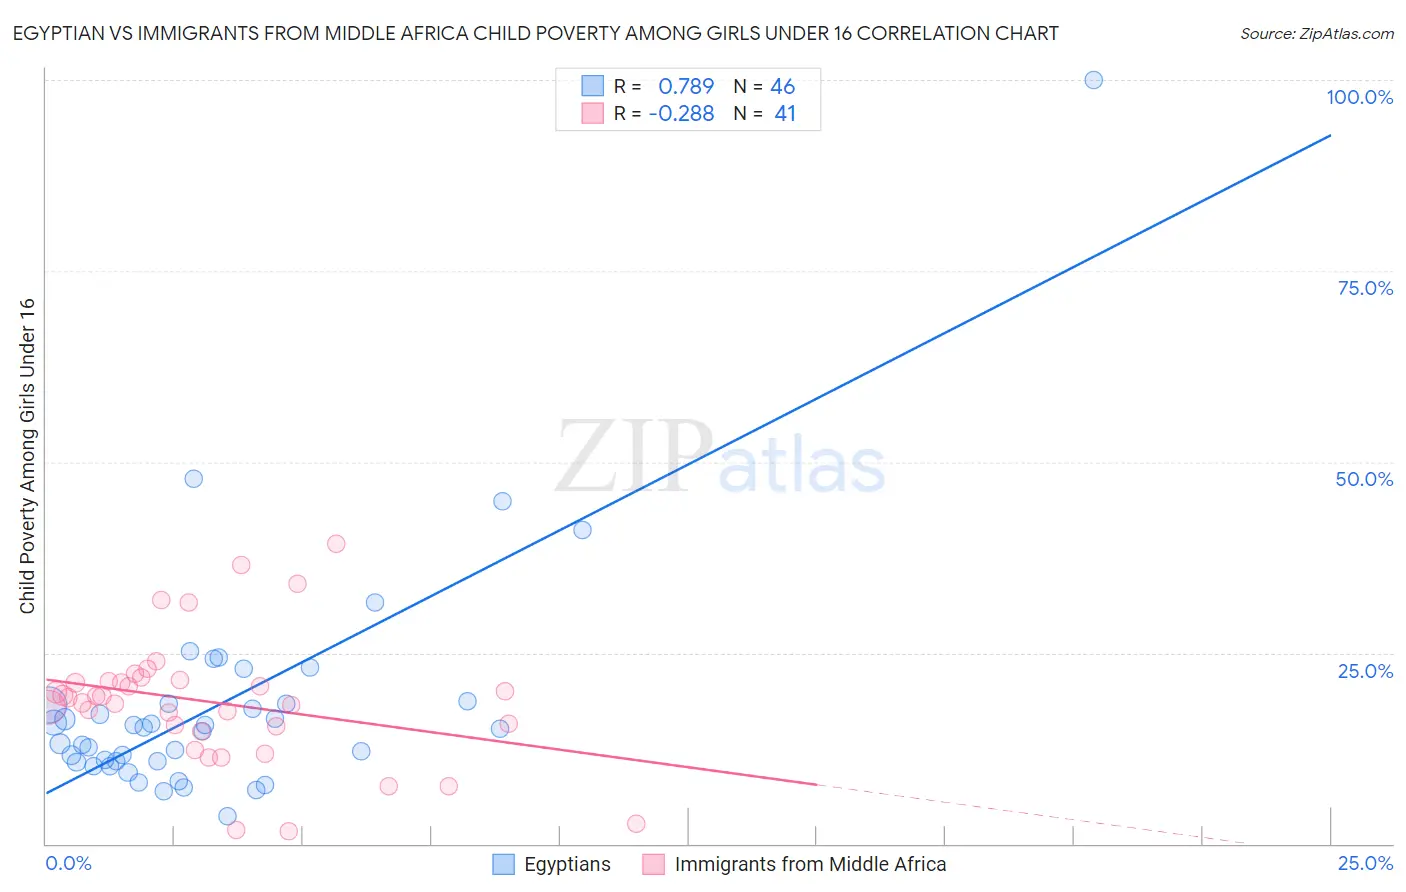 Egyptian vs Immigrants from Middle Africa Child Poverty Among Girls Under 16